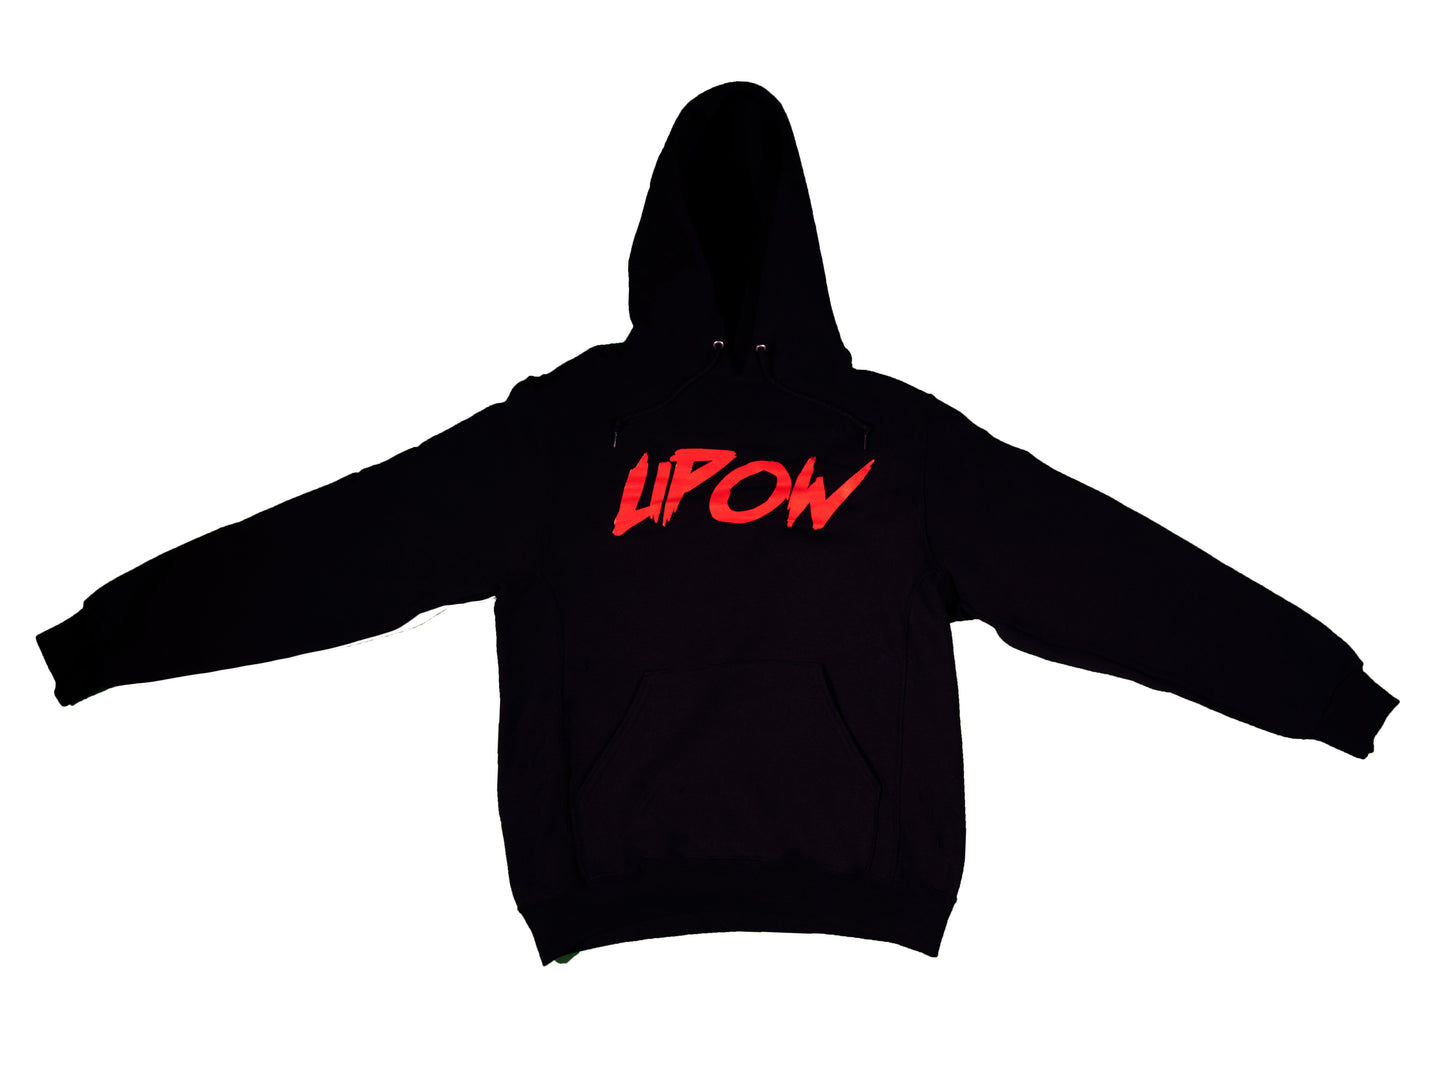 Upow Hoodie